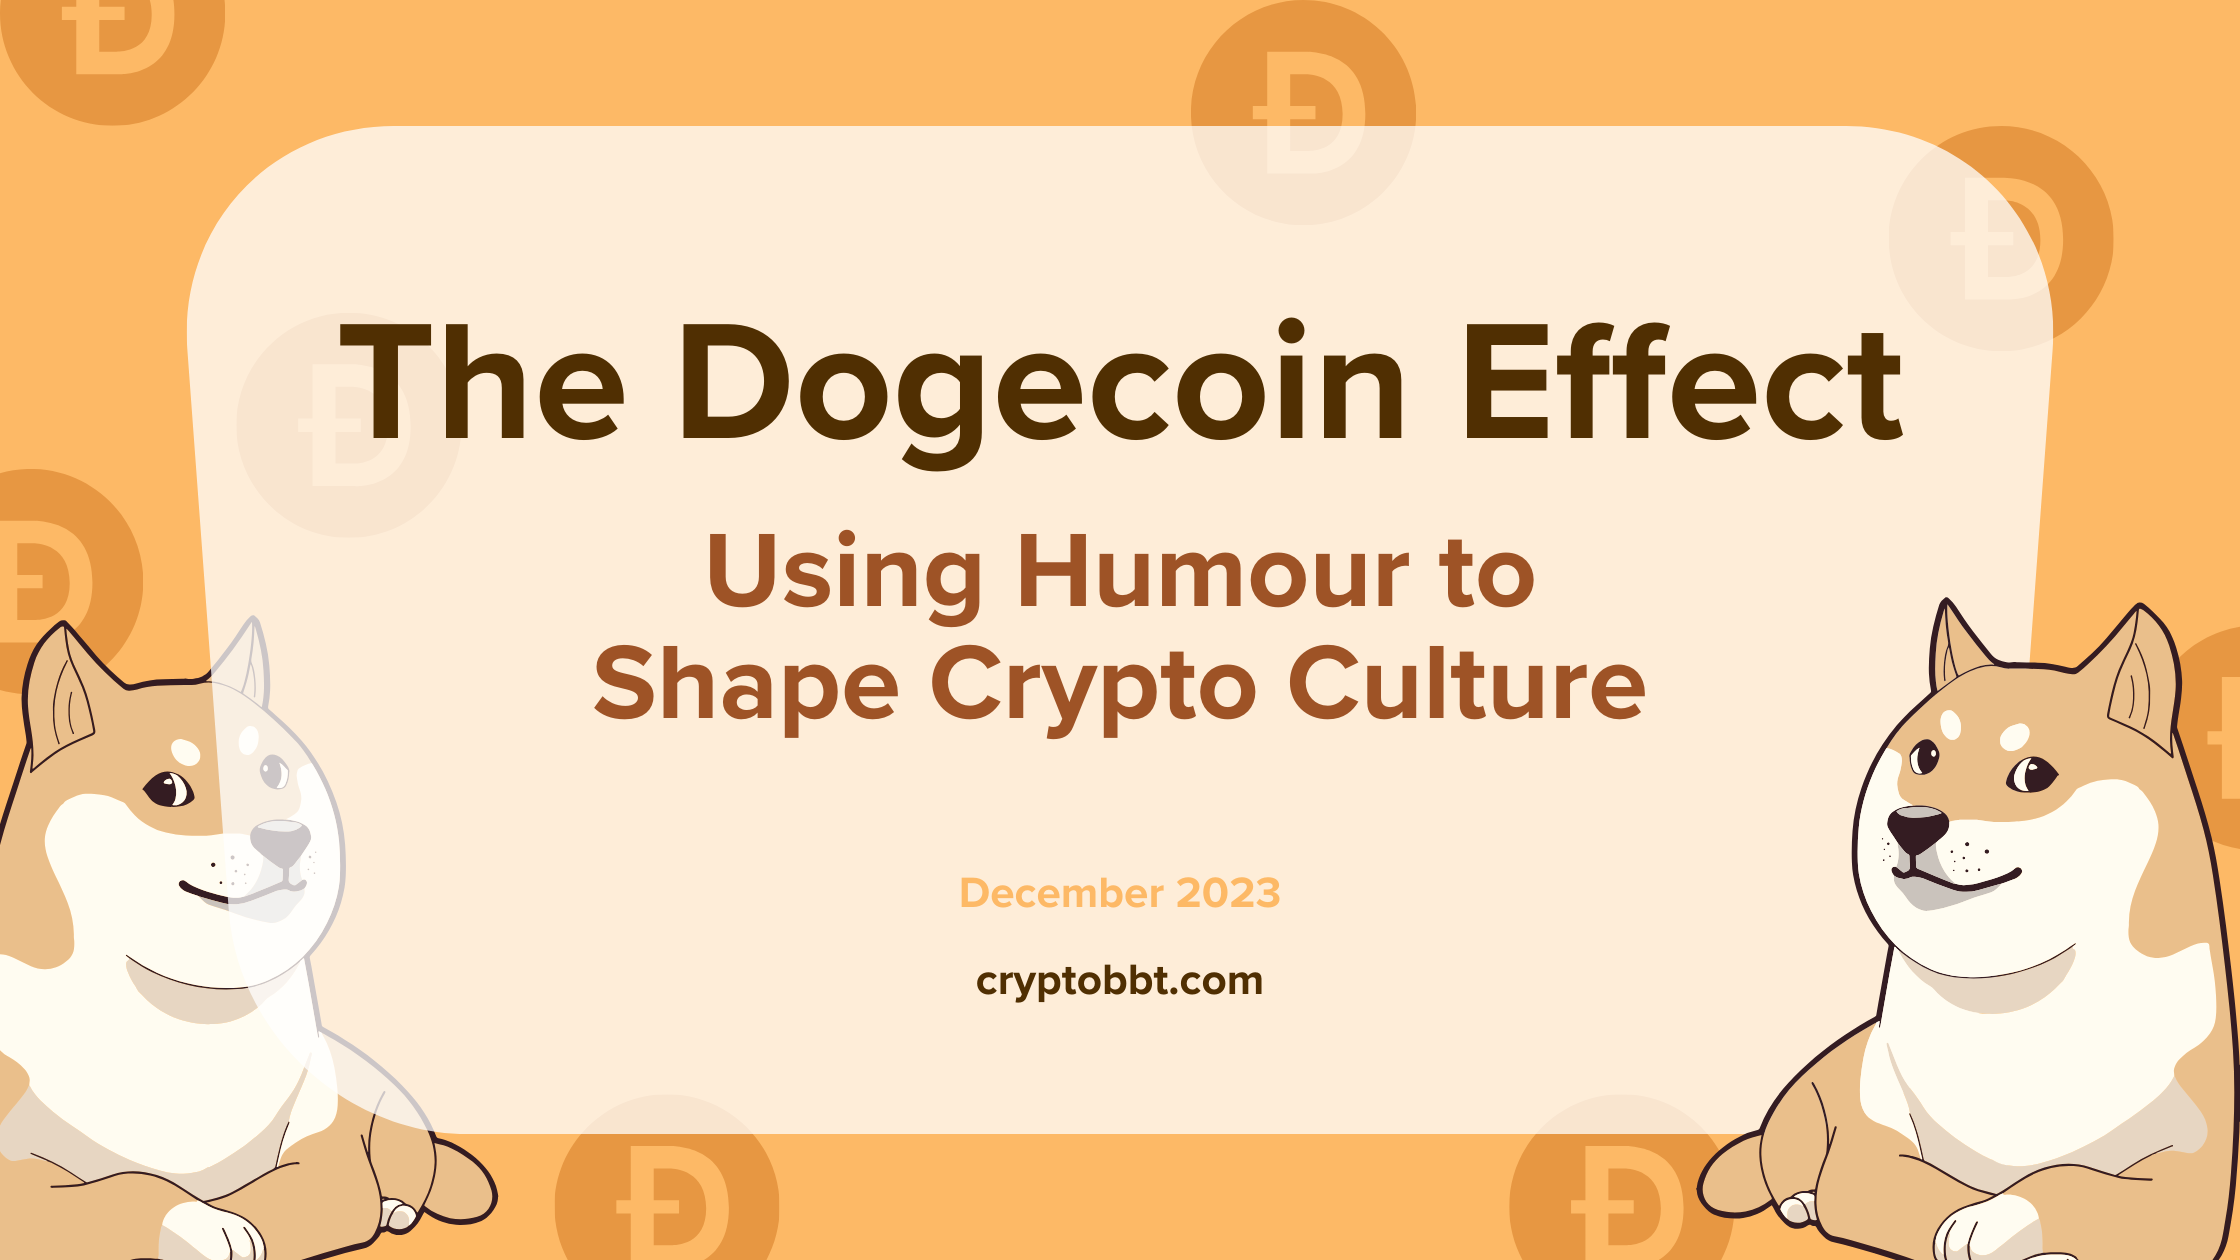 Dogecoin: How It Used Humour to Shape Crypto